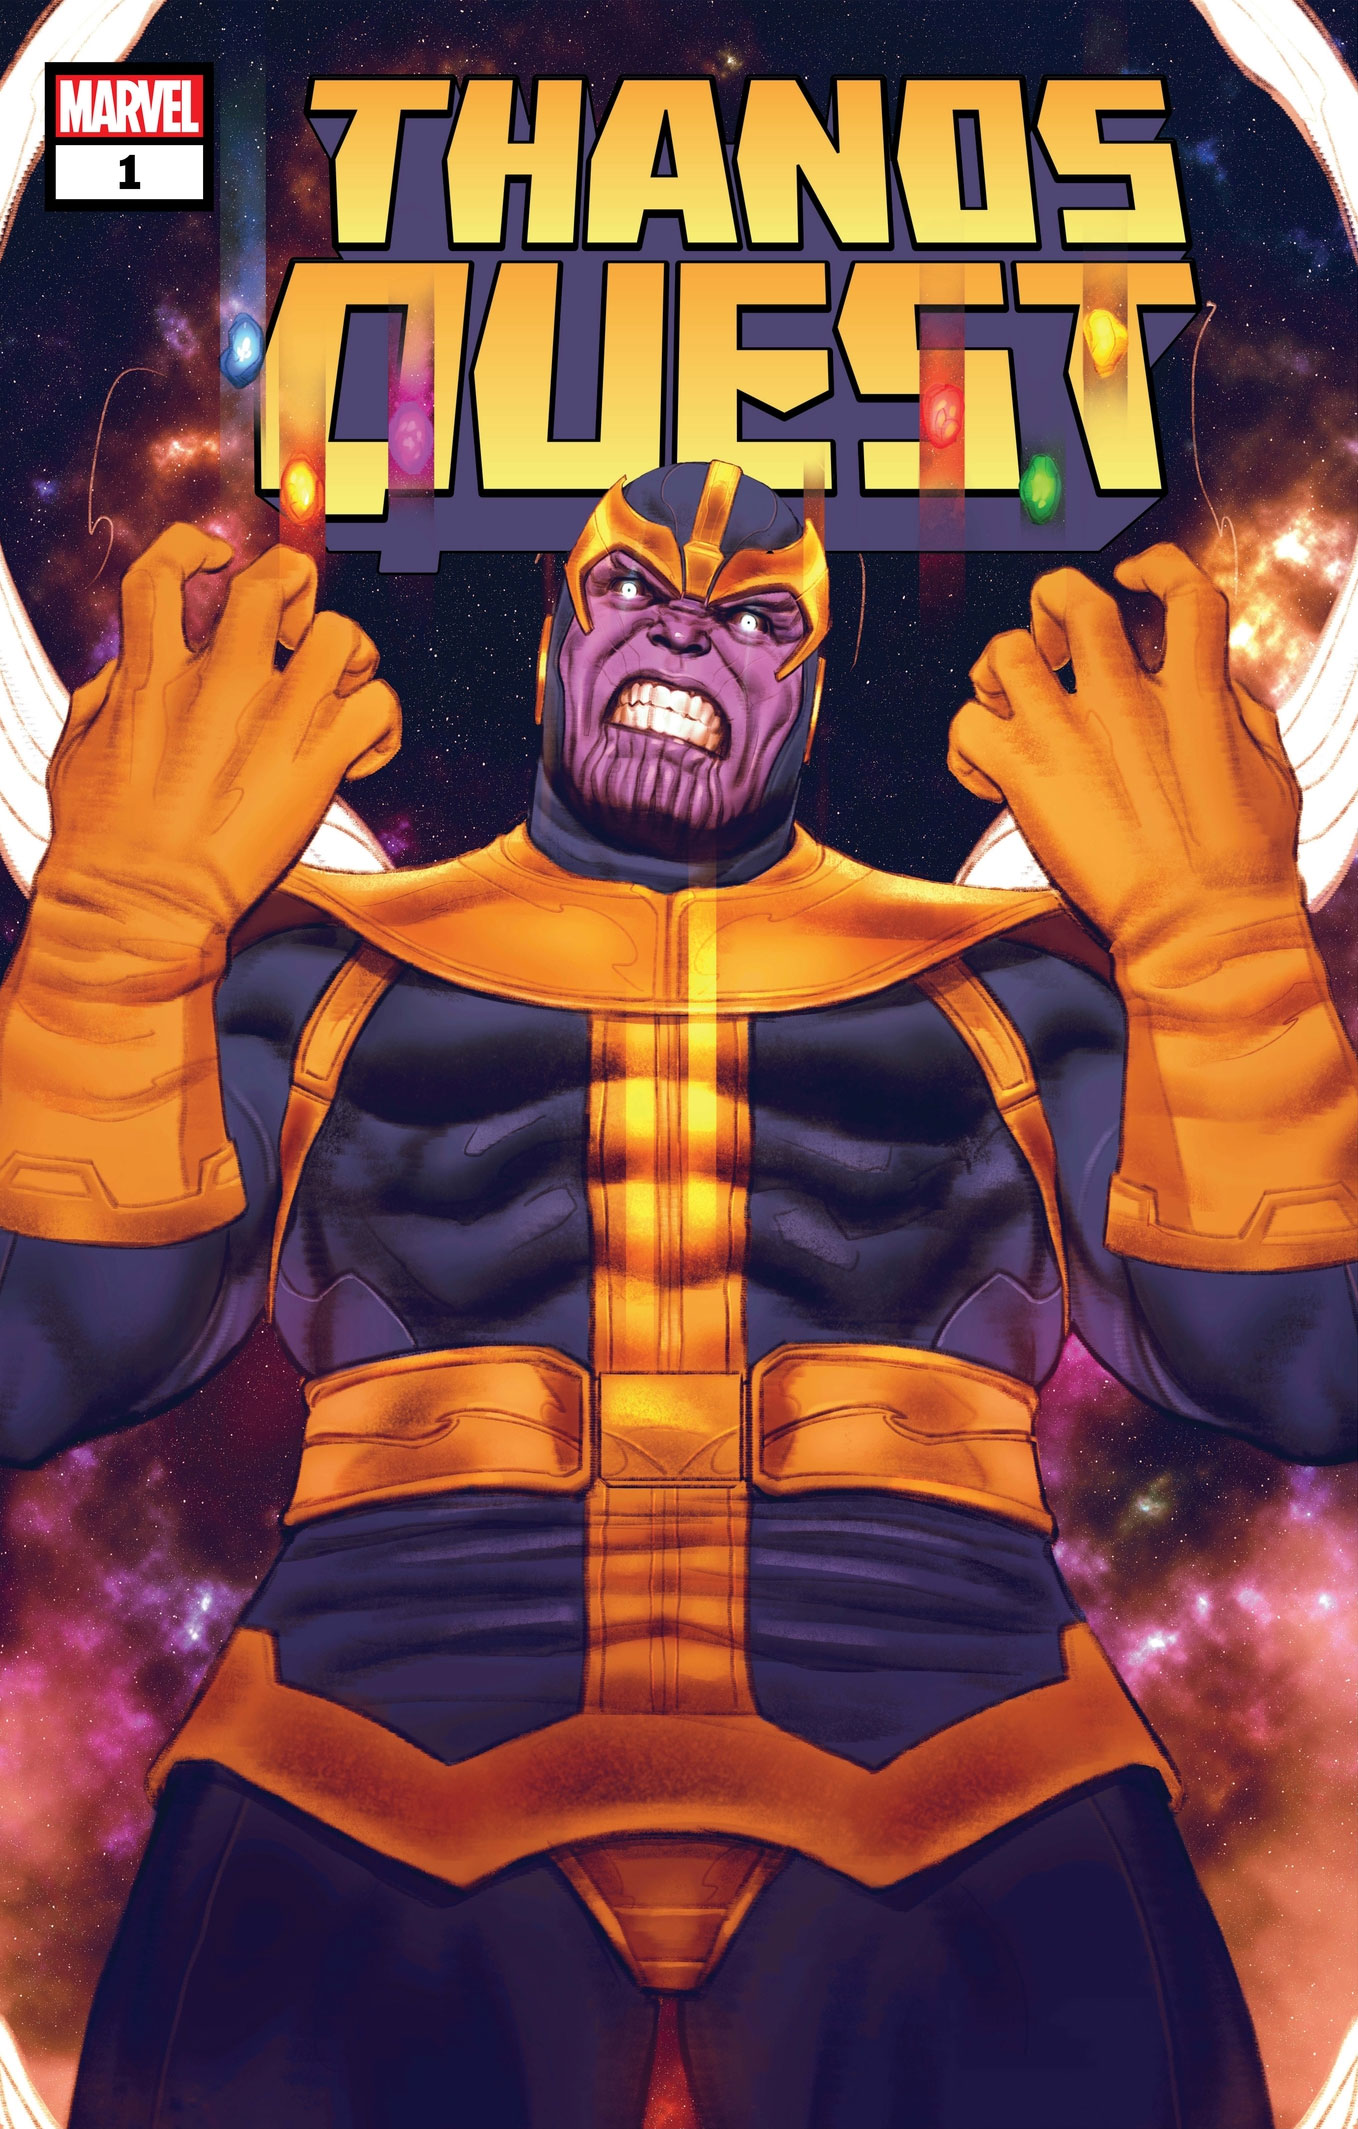 Thanos Quest Marvel Tales #1